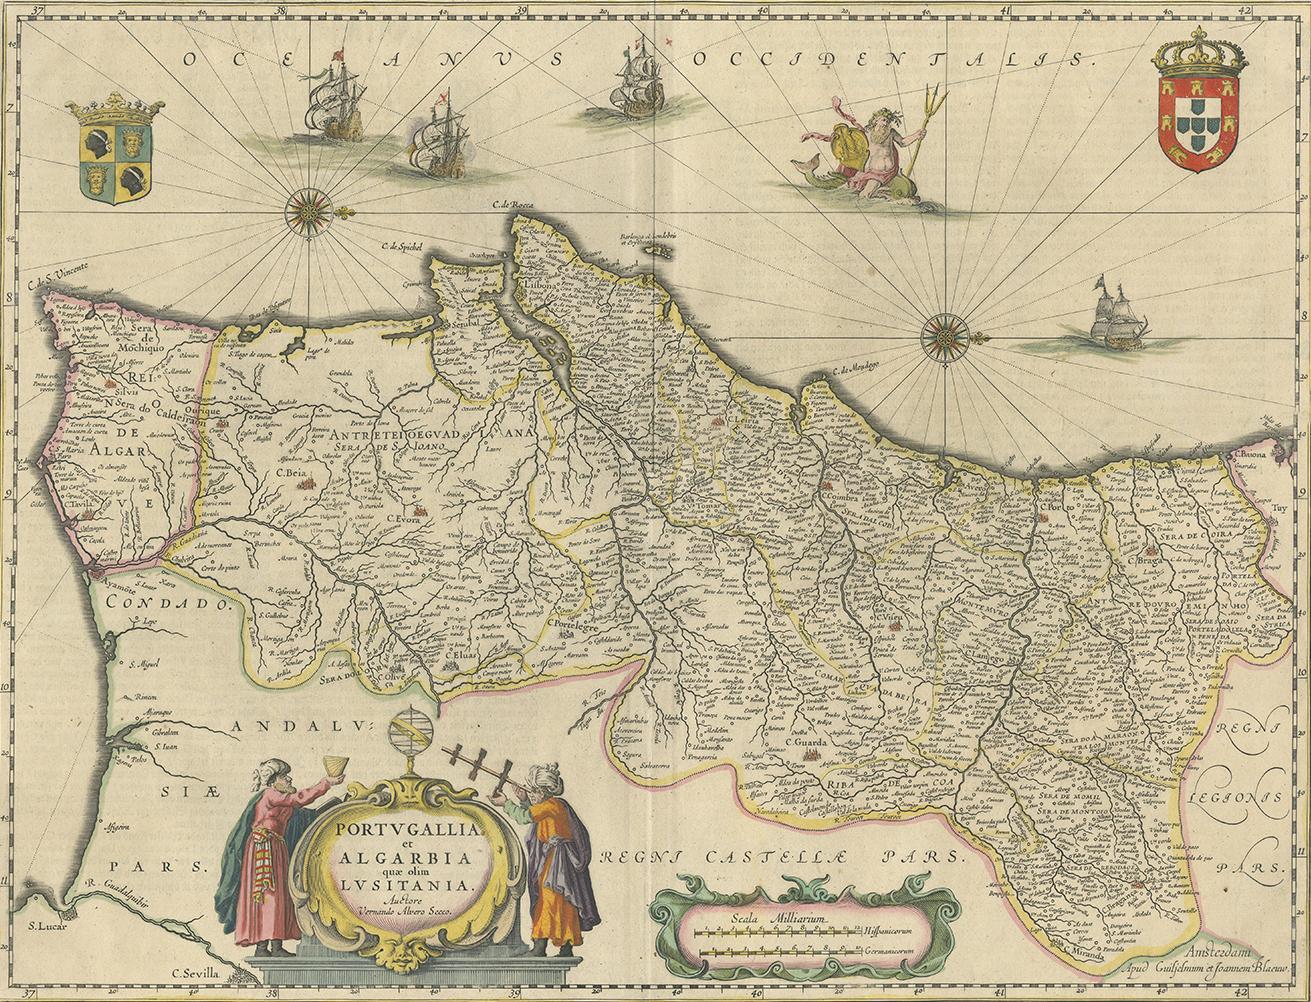 Antique map titled 'Portugallia et Algarbia quae olim Lusitania'. Decorative map of Portugal. Fine ornamental cartouche, containing title flanked by cartographers, secondary cartouche has two scales. Four ships at sea, ornamental compass and Neptune